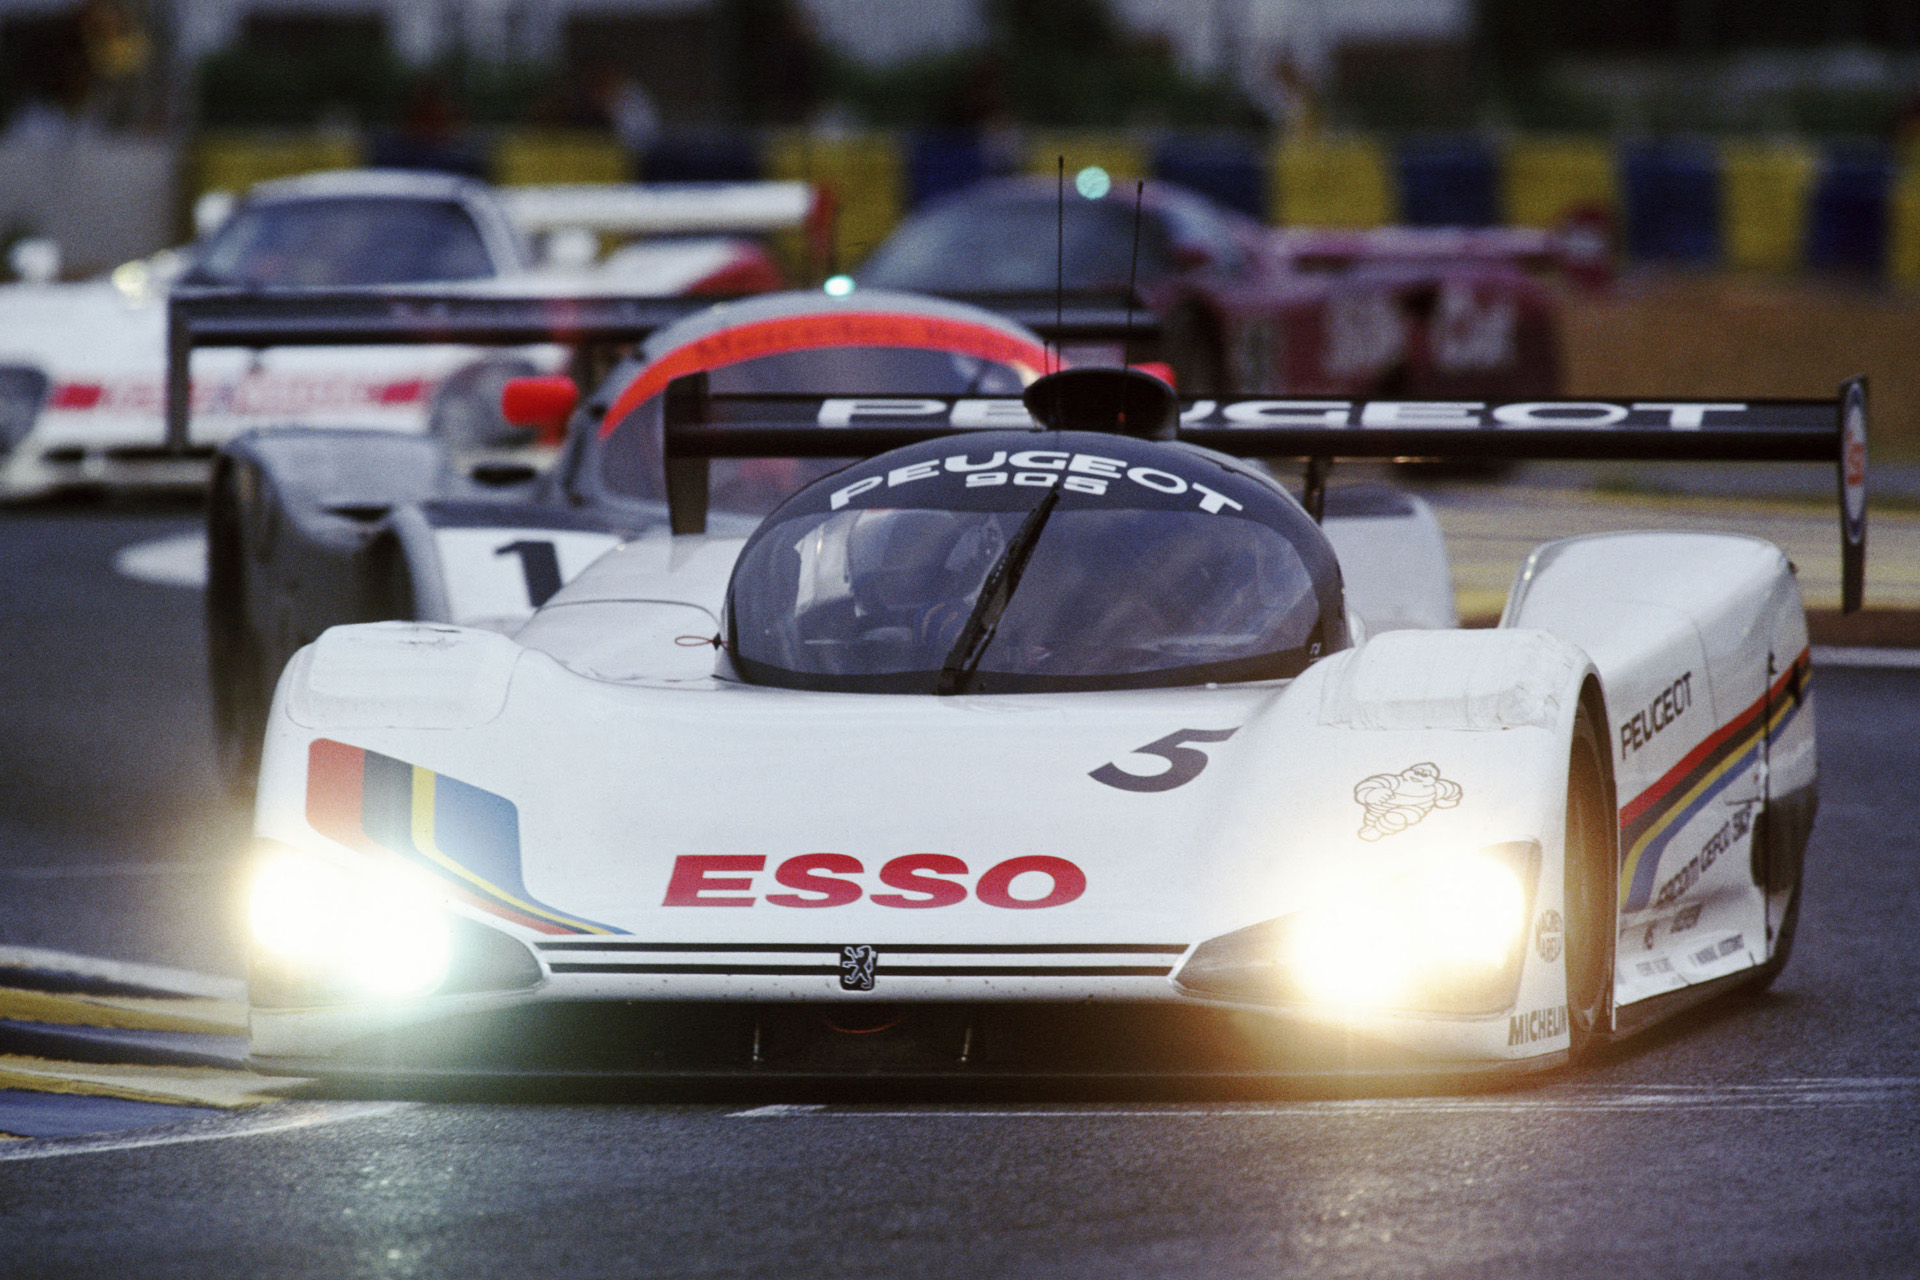 Peugeot 905 picture. Peugeot photo gallery